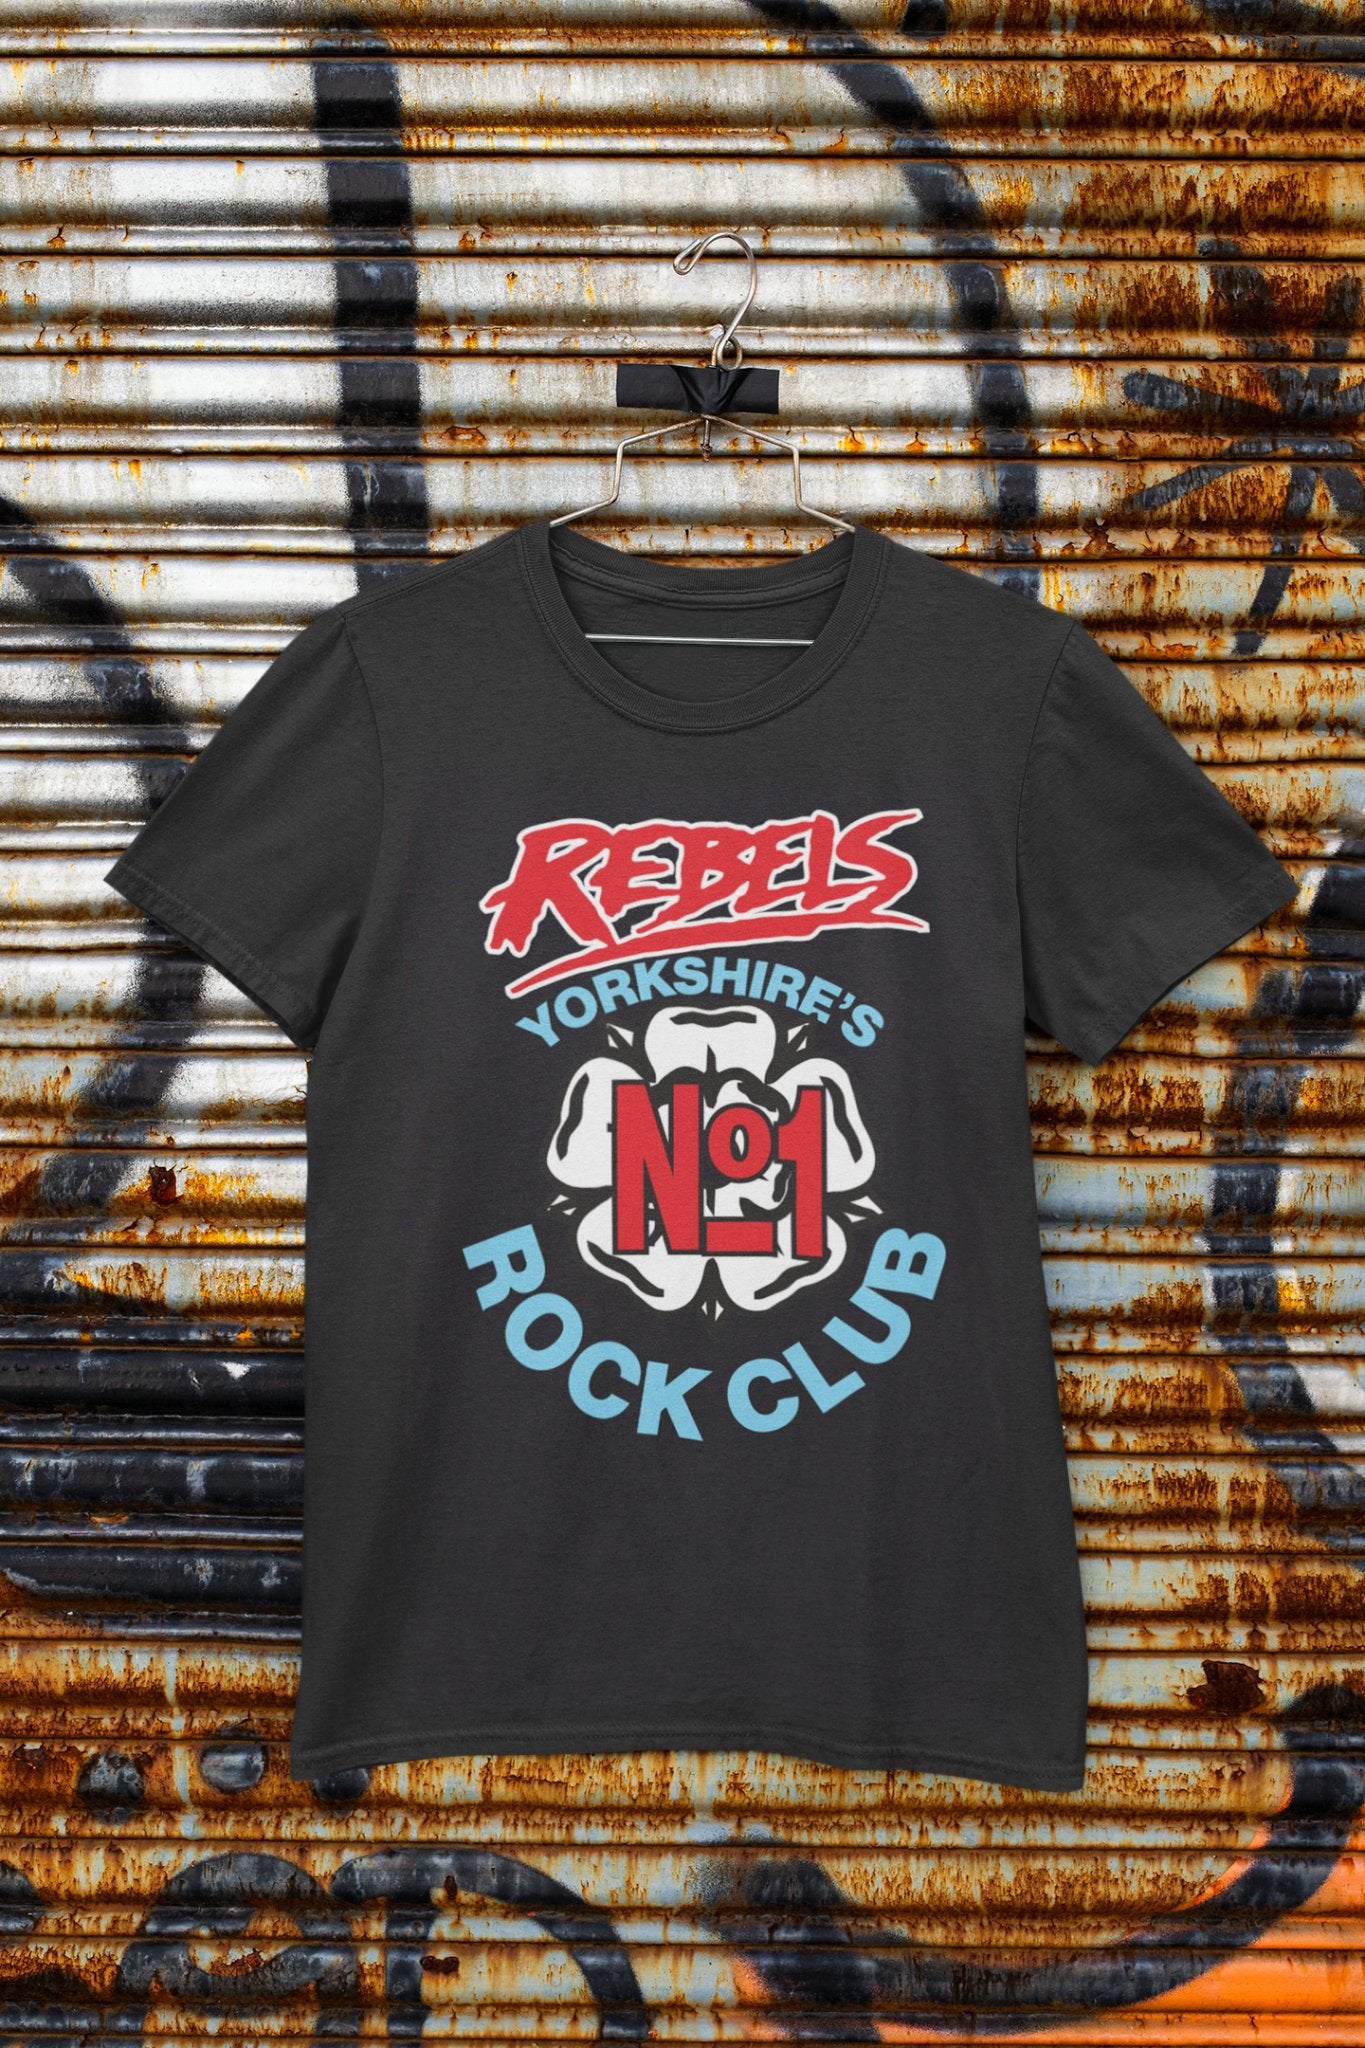 Rebels No. 1 rock club unisex T-shirt - various colours - Dirty Stop Outs